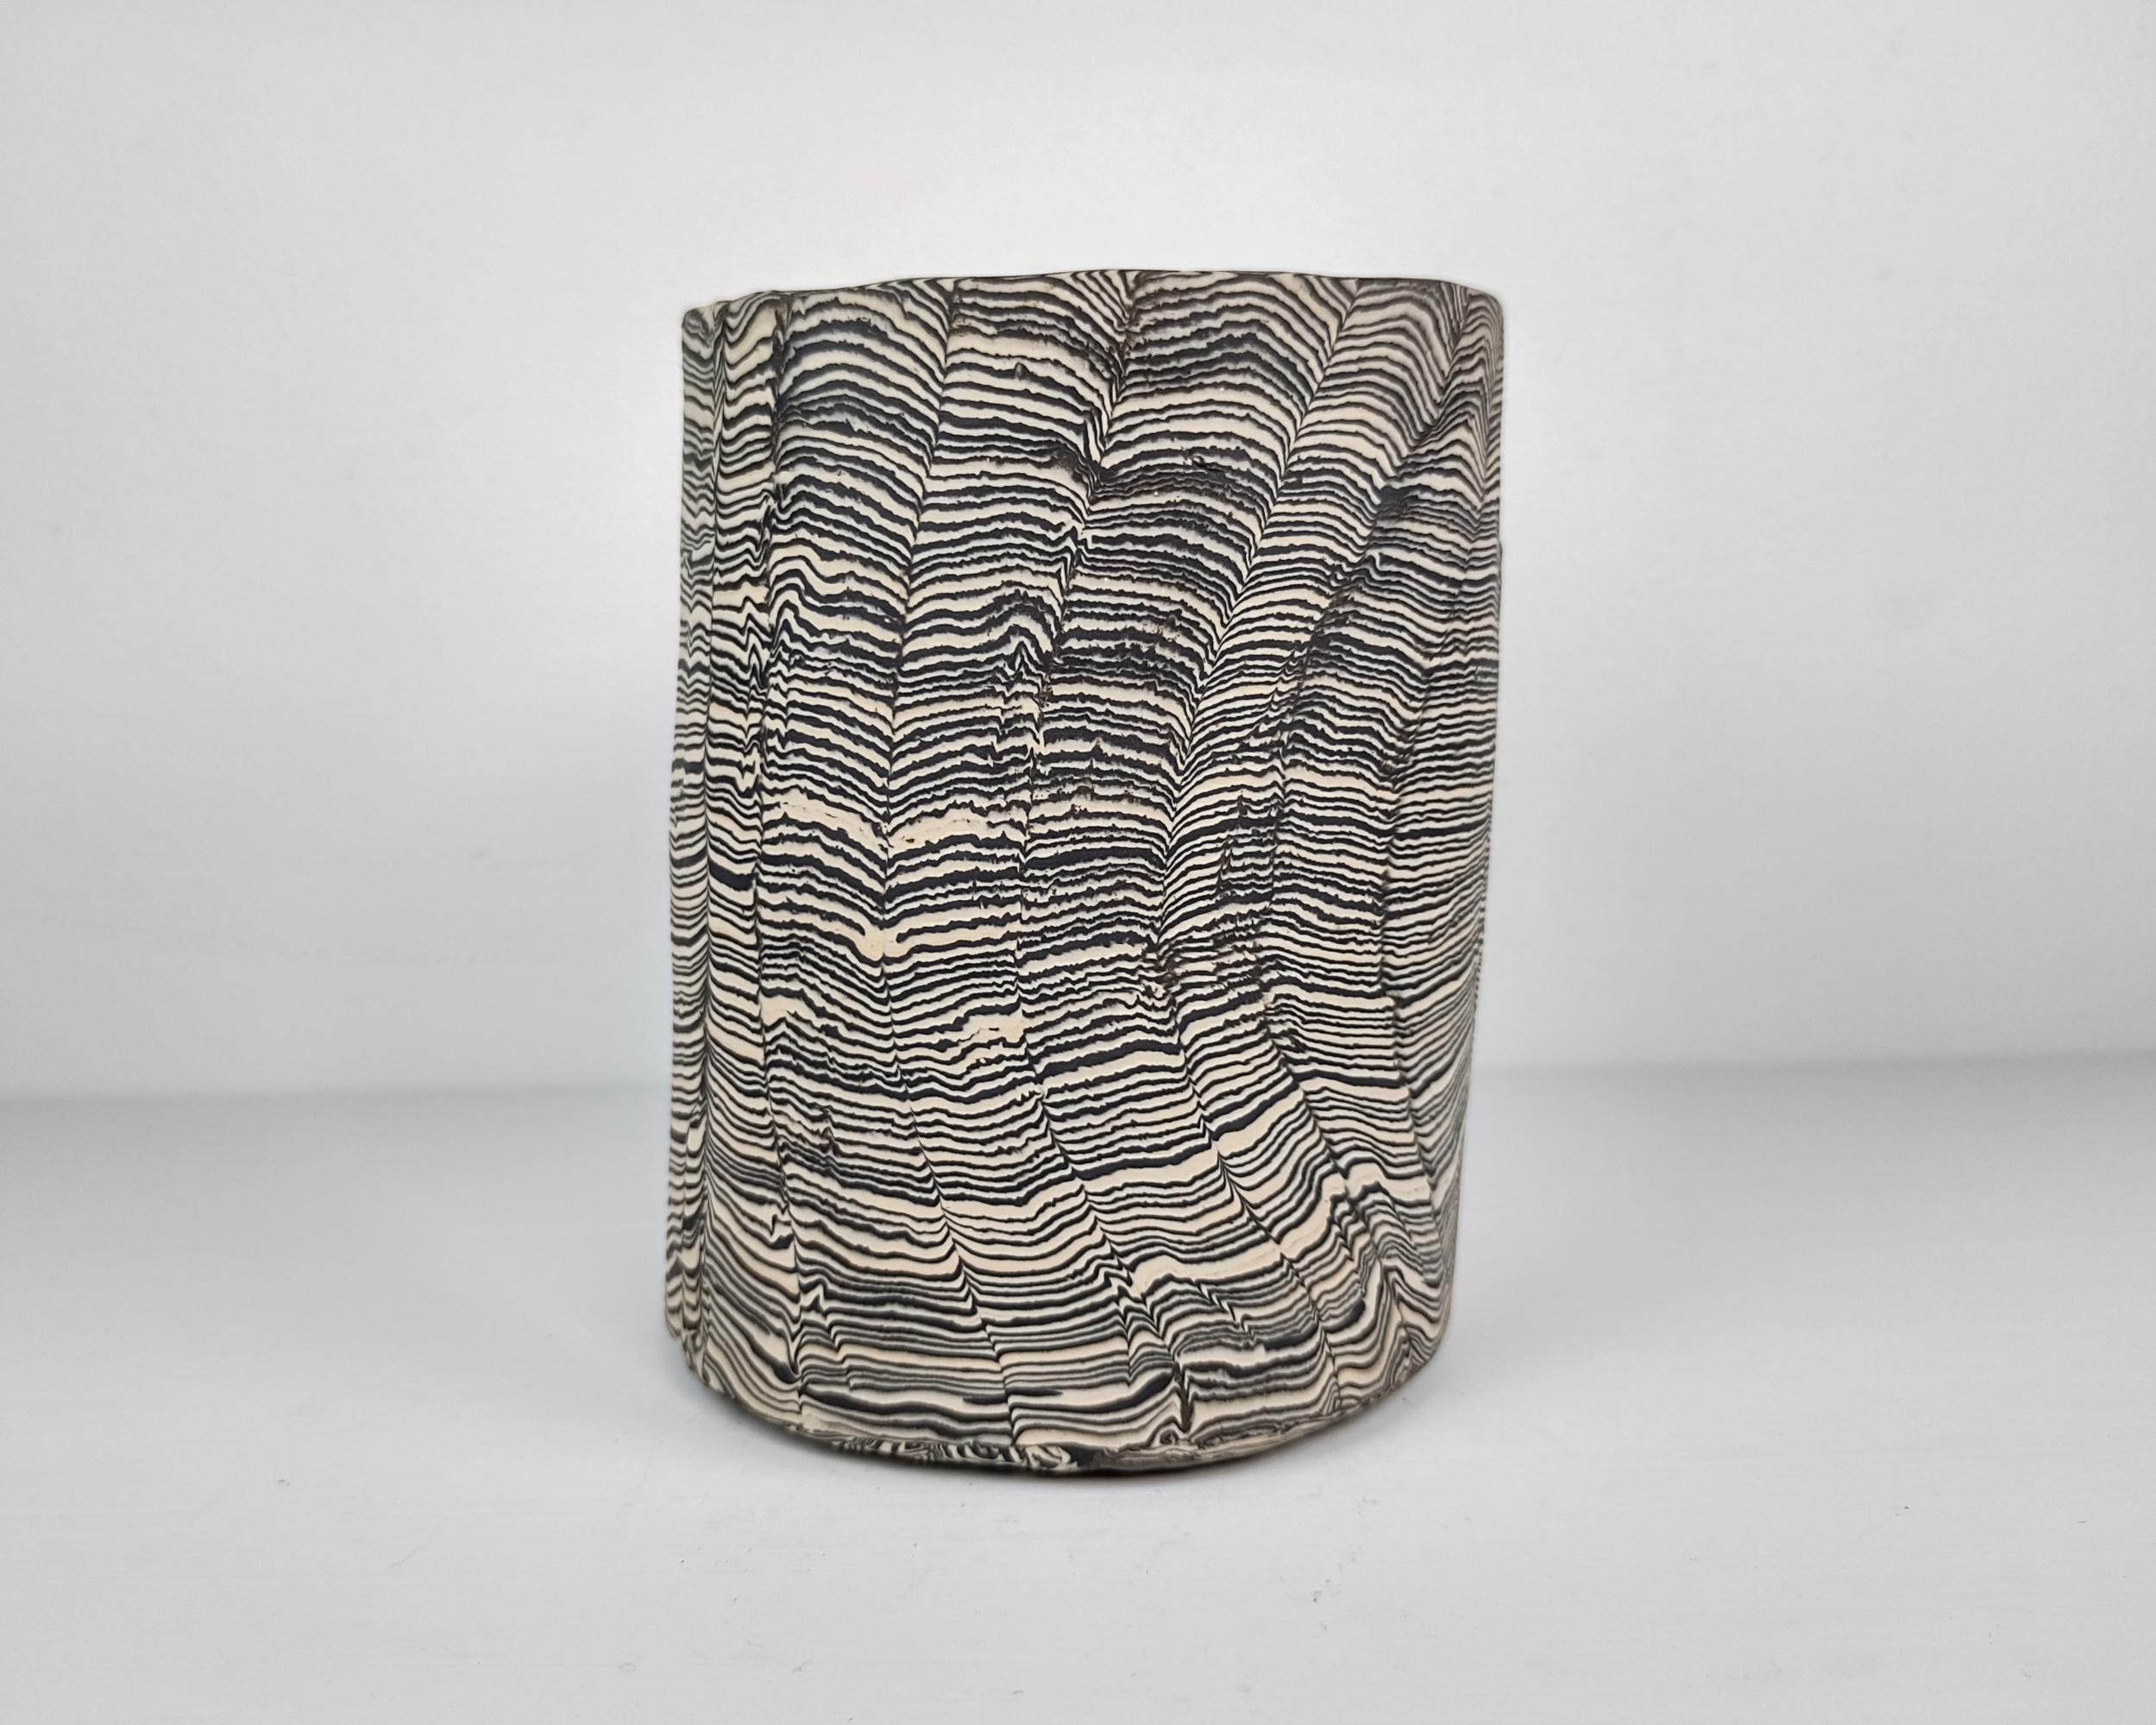 Handmade Nerikomi Vase with two types of clay. Made and fired in Los Angeles by Fizzy Ceramics in 2020. Unglazed on the outside and matte black on the inside. Fired to cone 5 in oxidation, each piece is watertight and is designed to be used as a